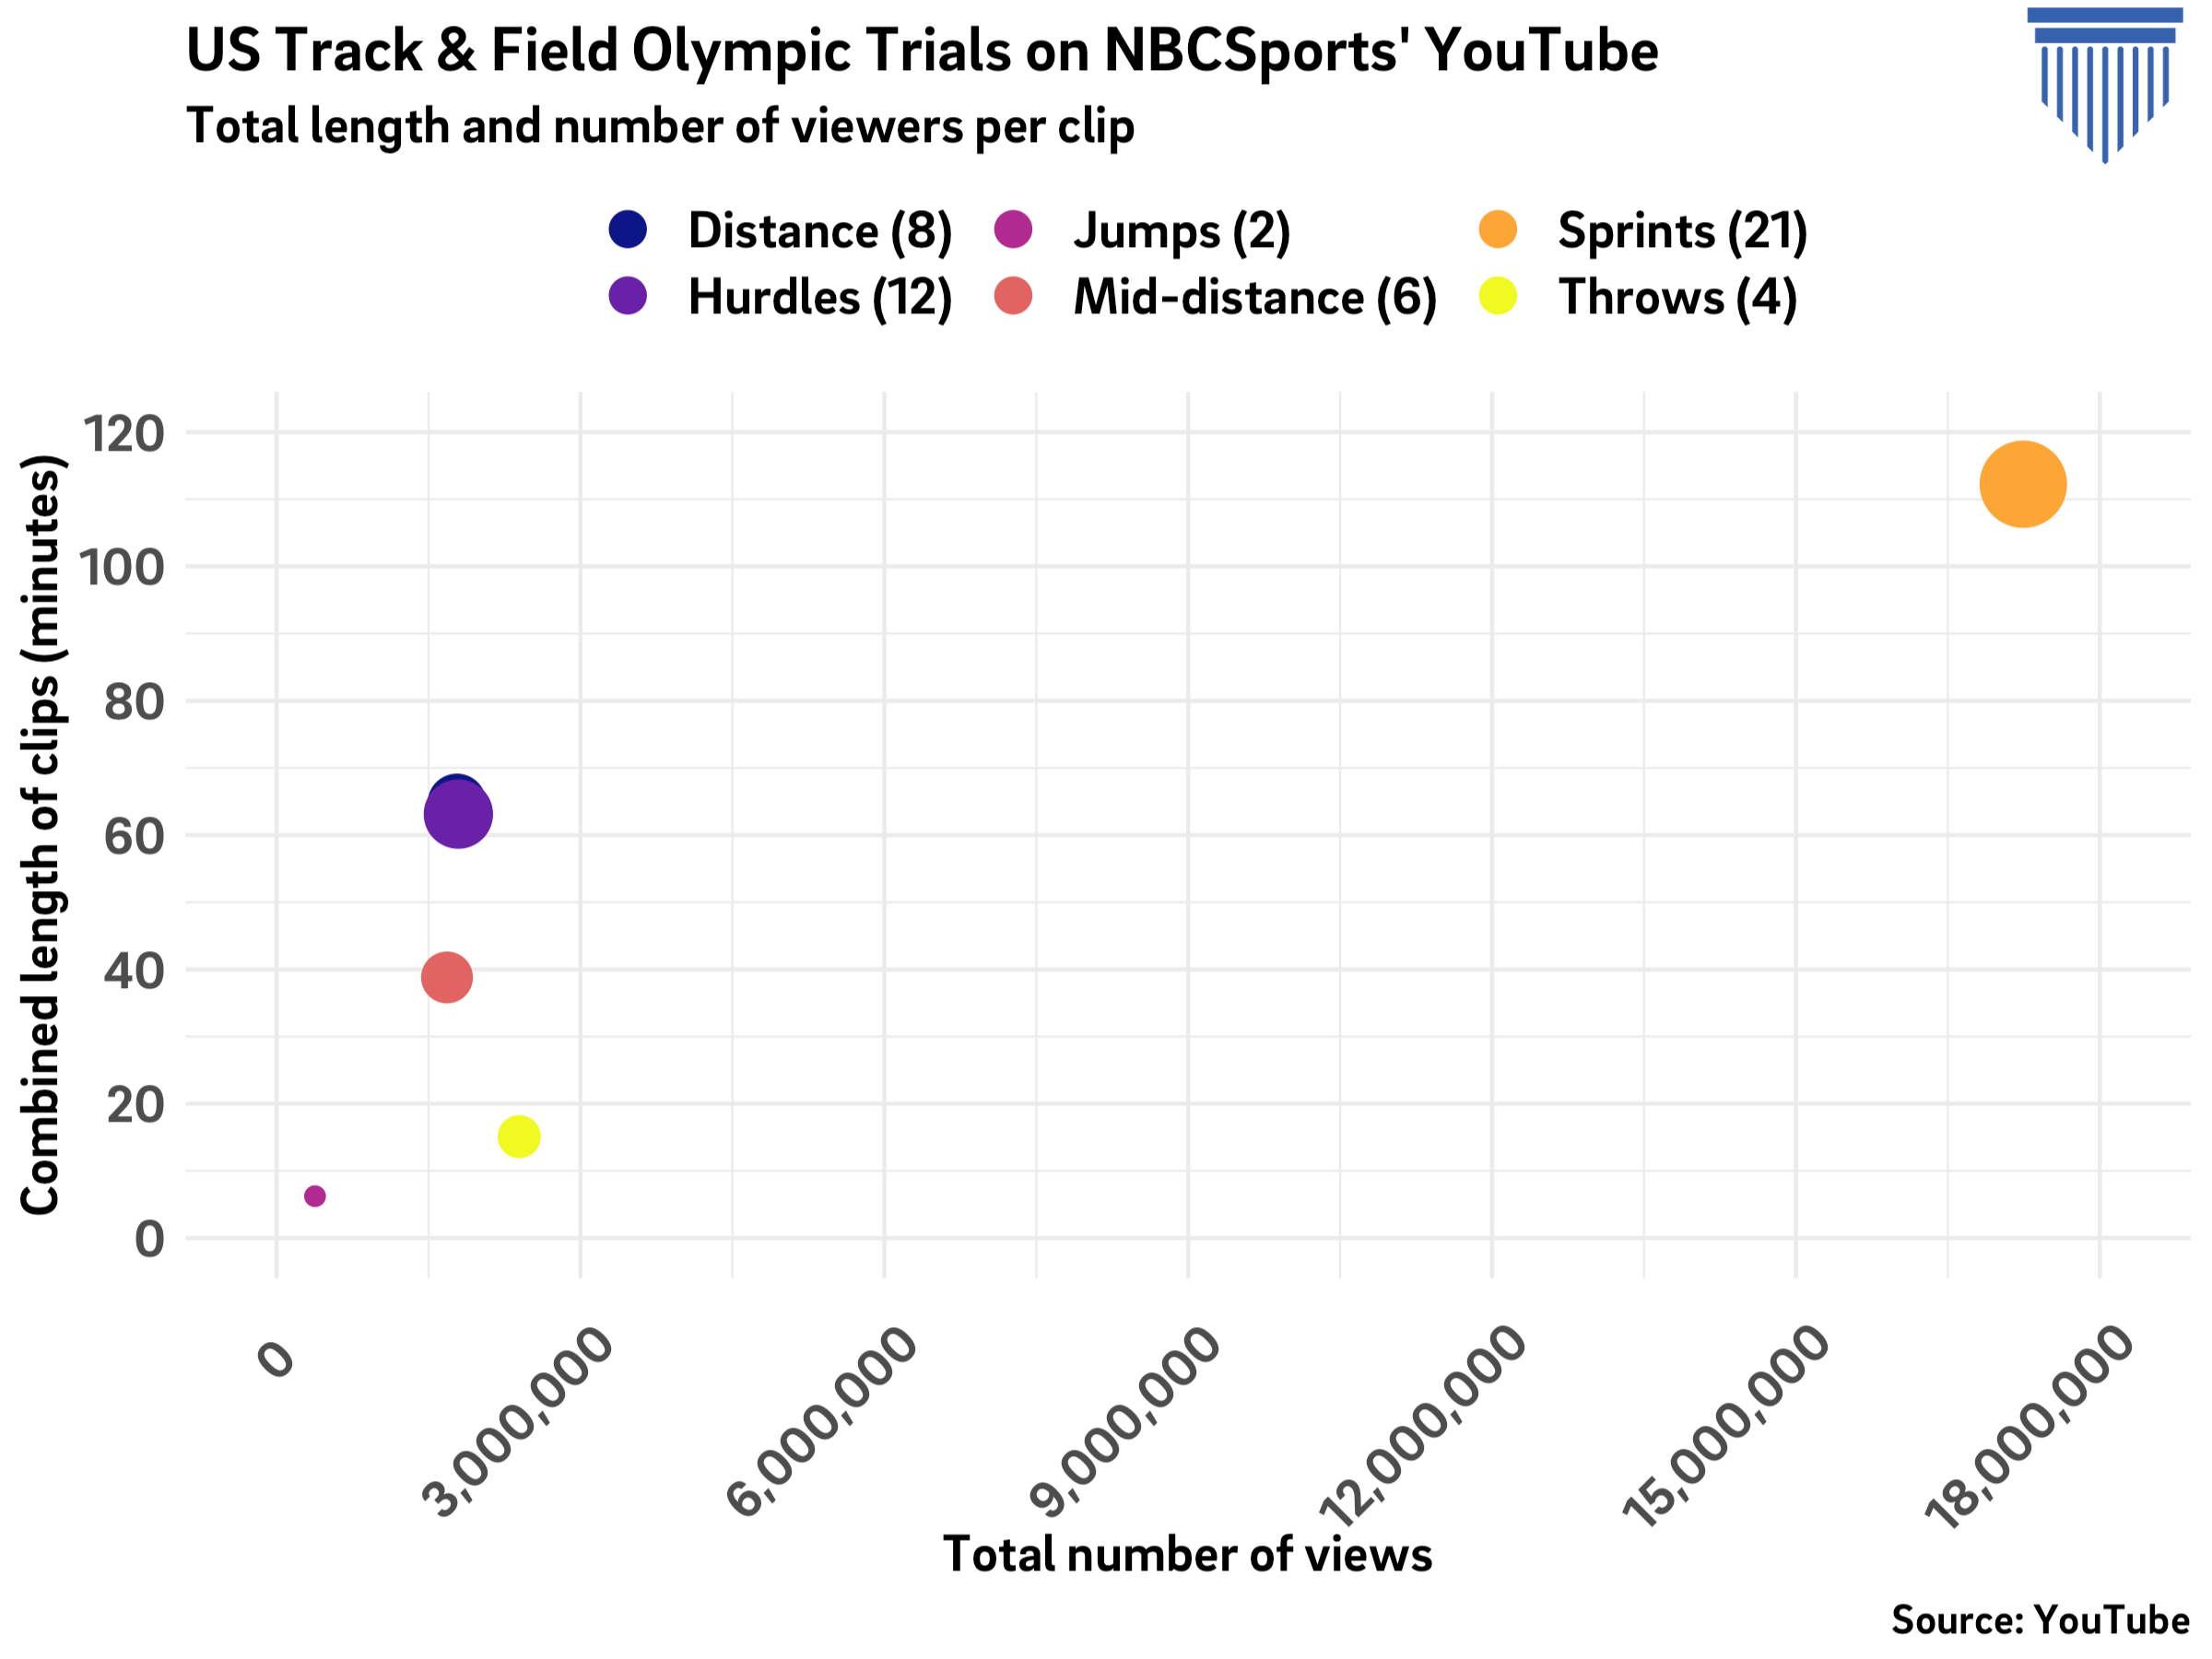 USA Track & Field Olympic Trials: Total views per event group on NBCSports YouTube